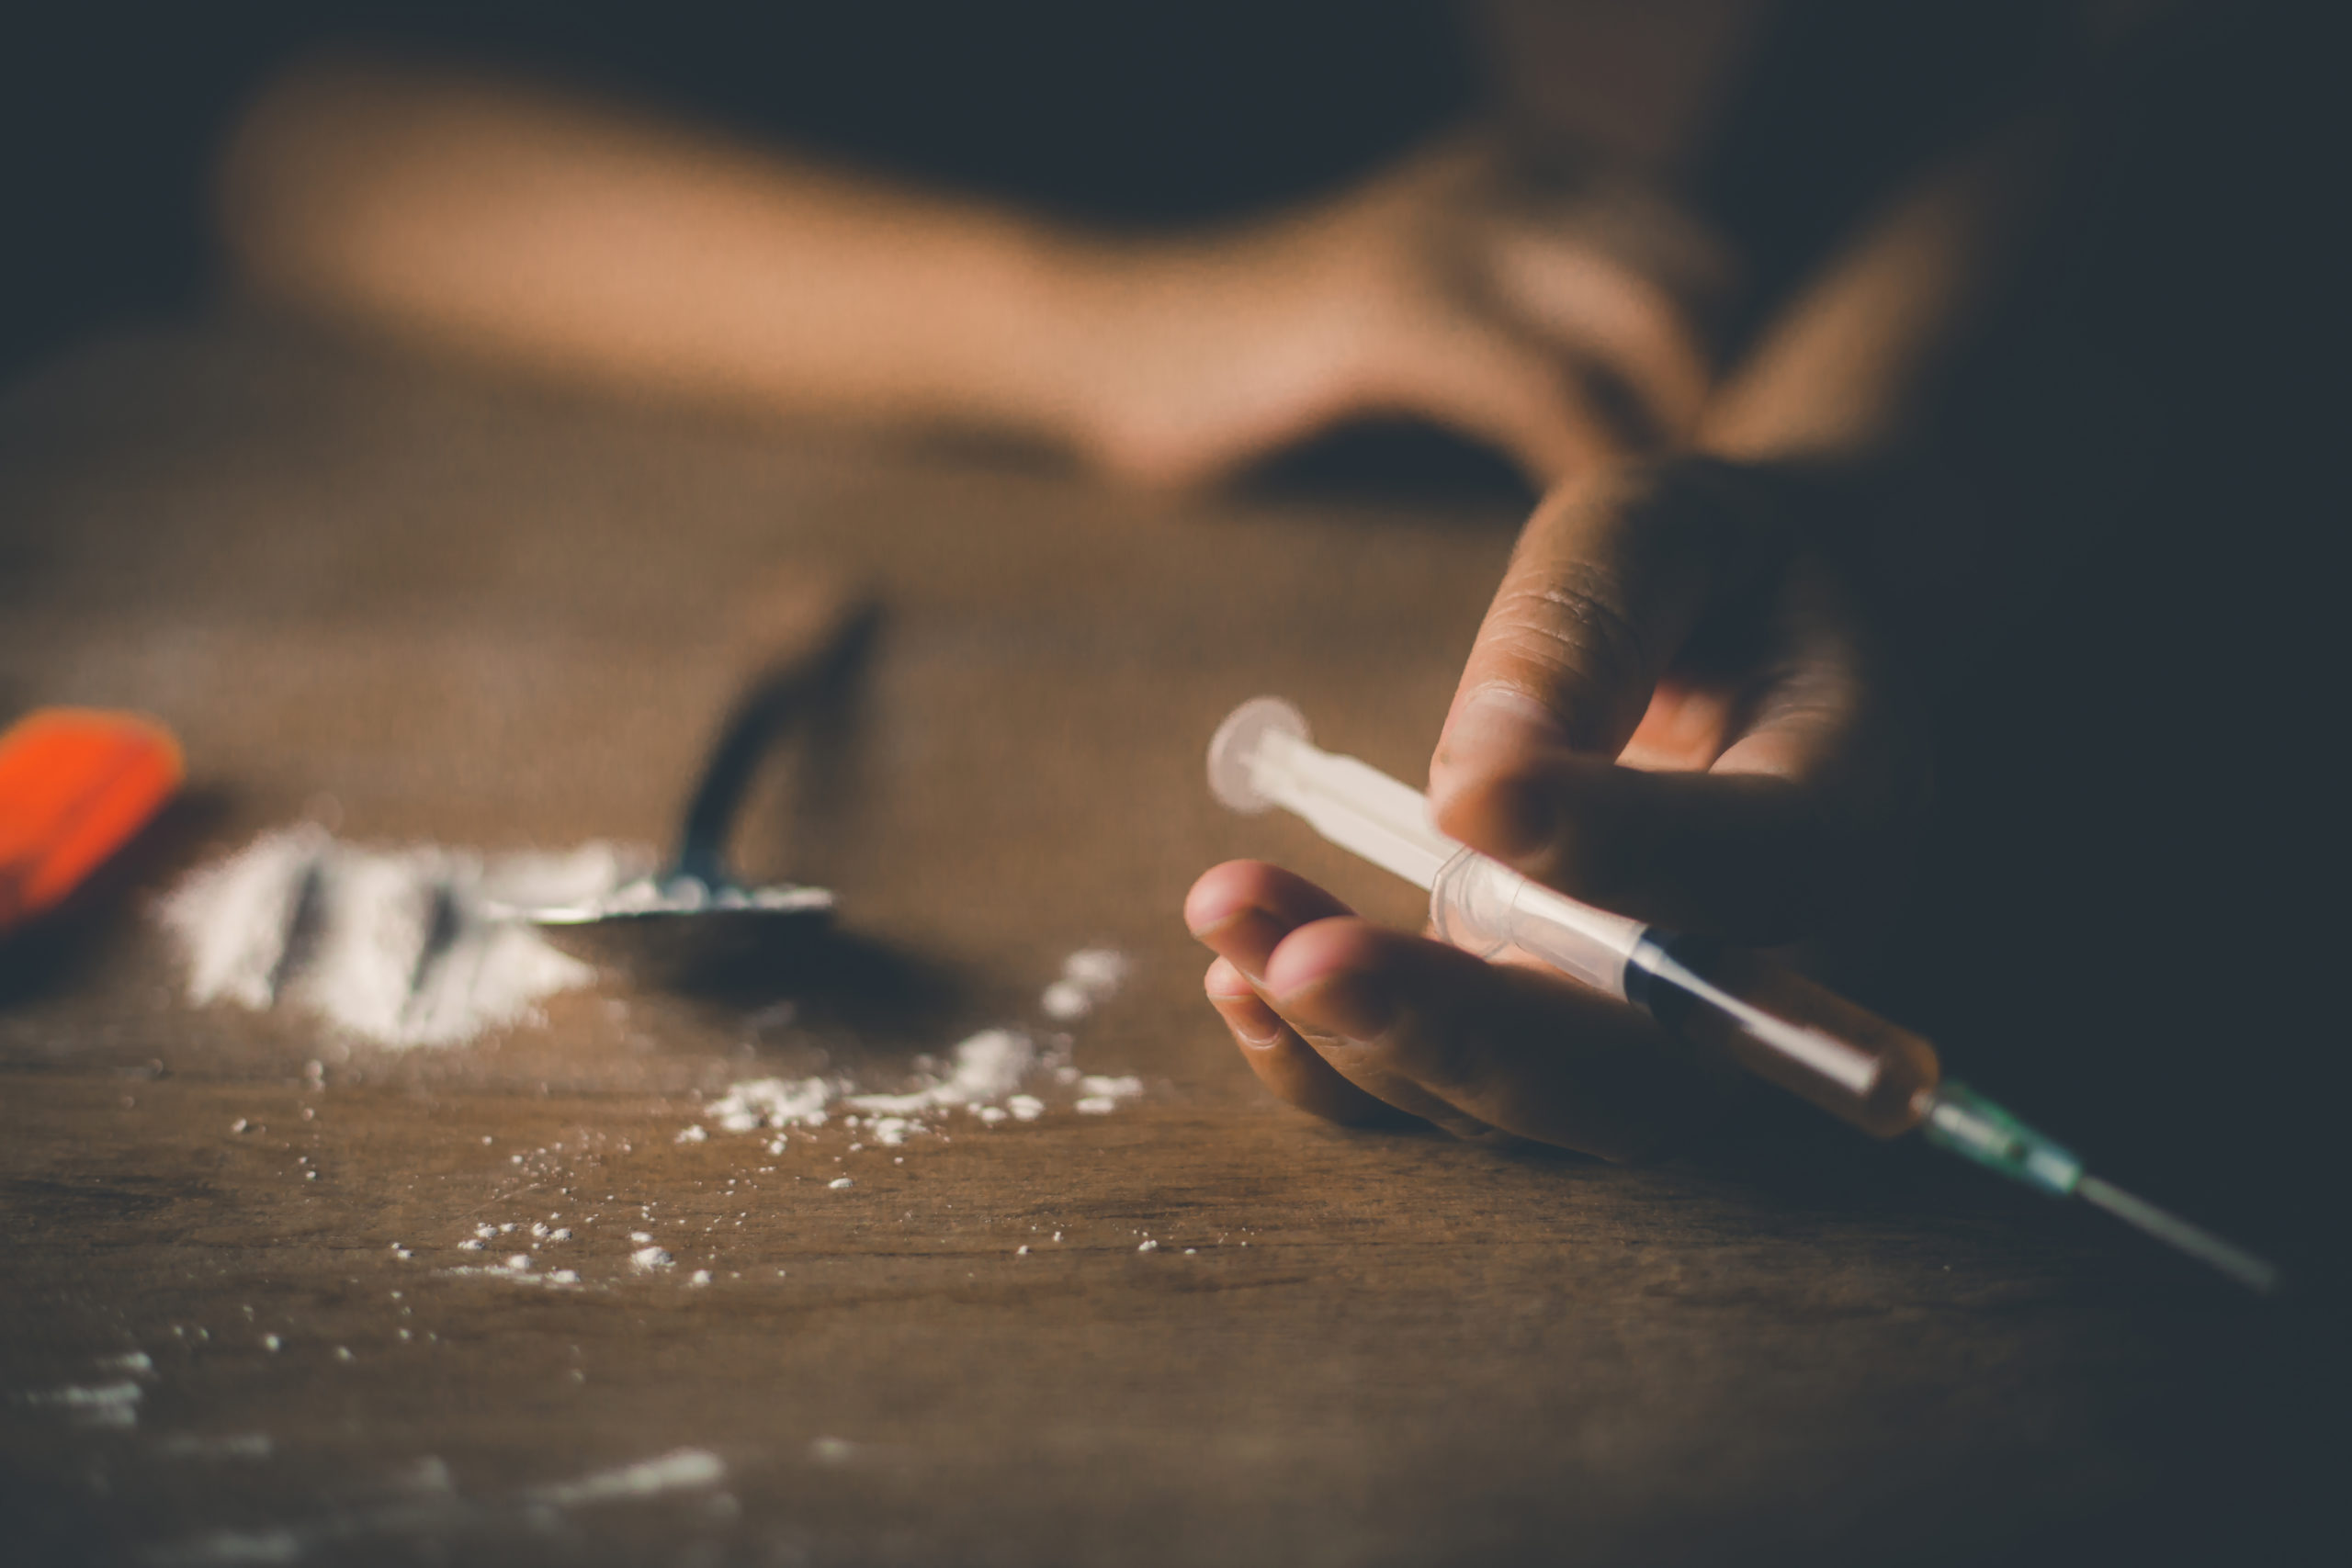 Hands on table holding needle filled with opioids